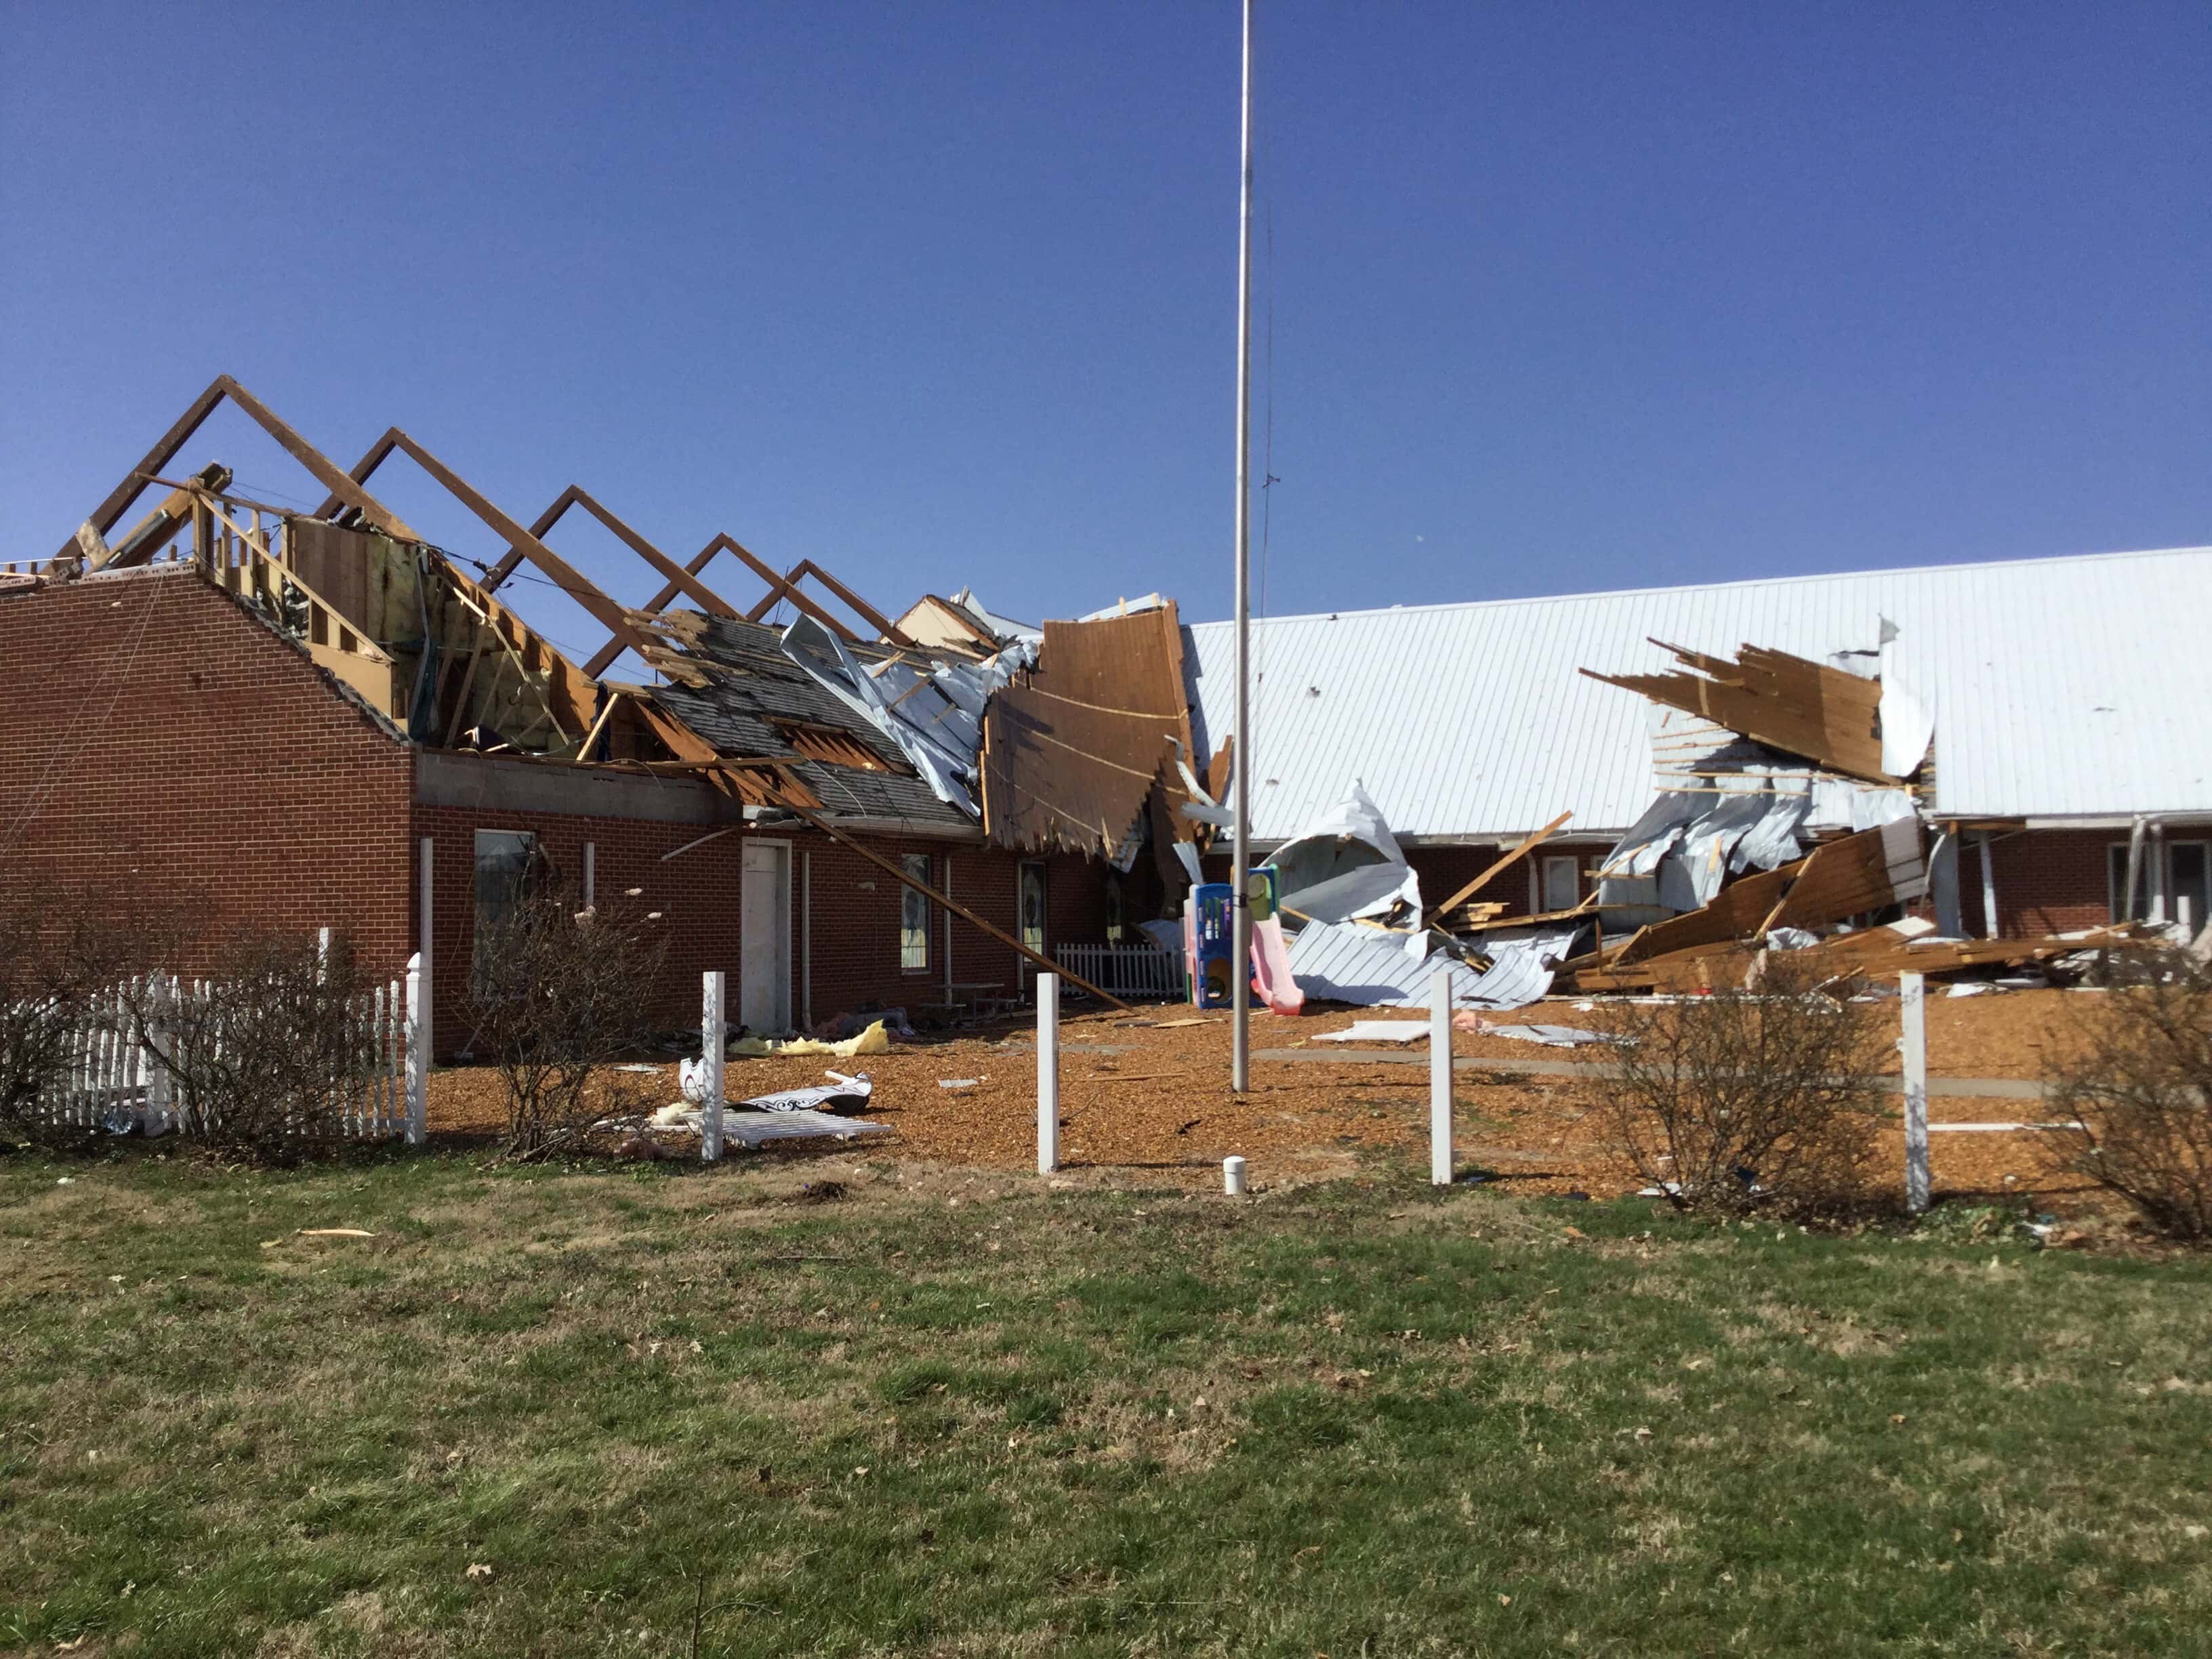 NWS Confirms 4 Tornadoes Touched Down in KY Thursday | WKDZ Radio 